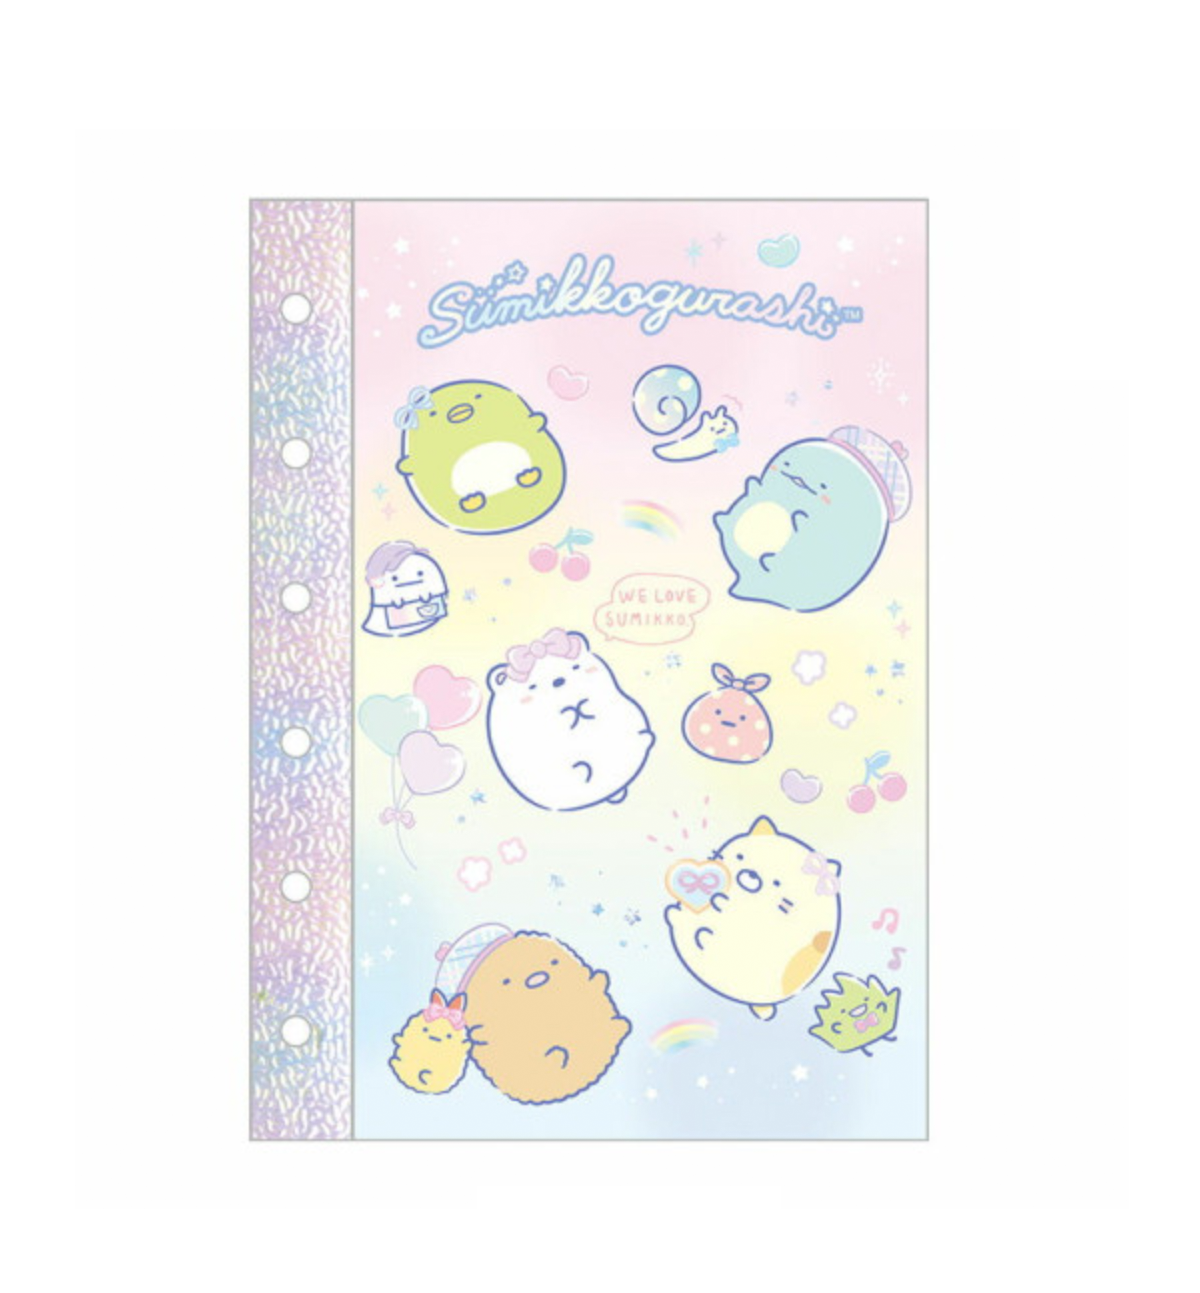 Sumikko Gurashi Sticker Collecting Pages [Sweets]